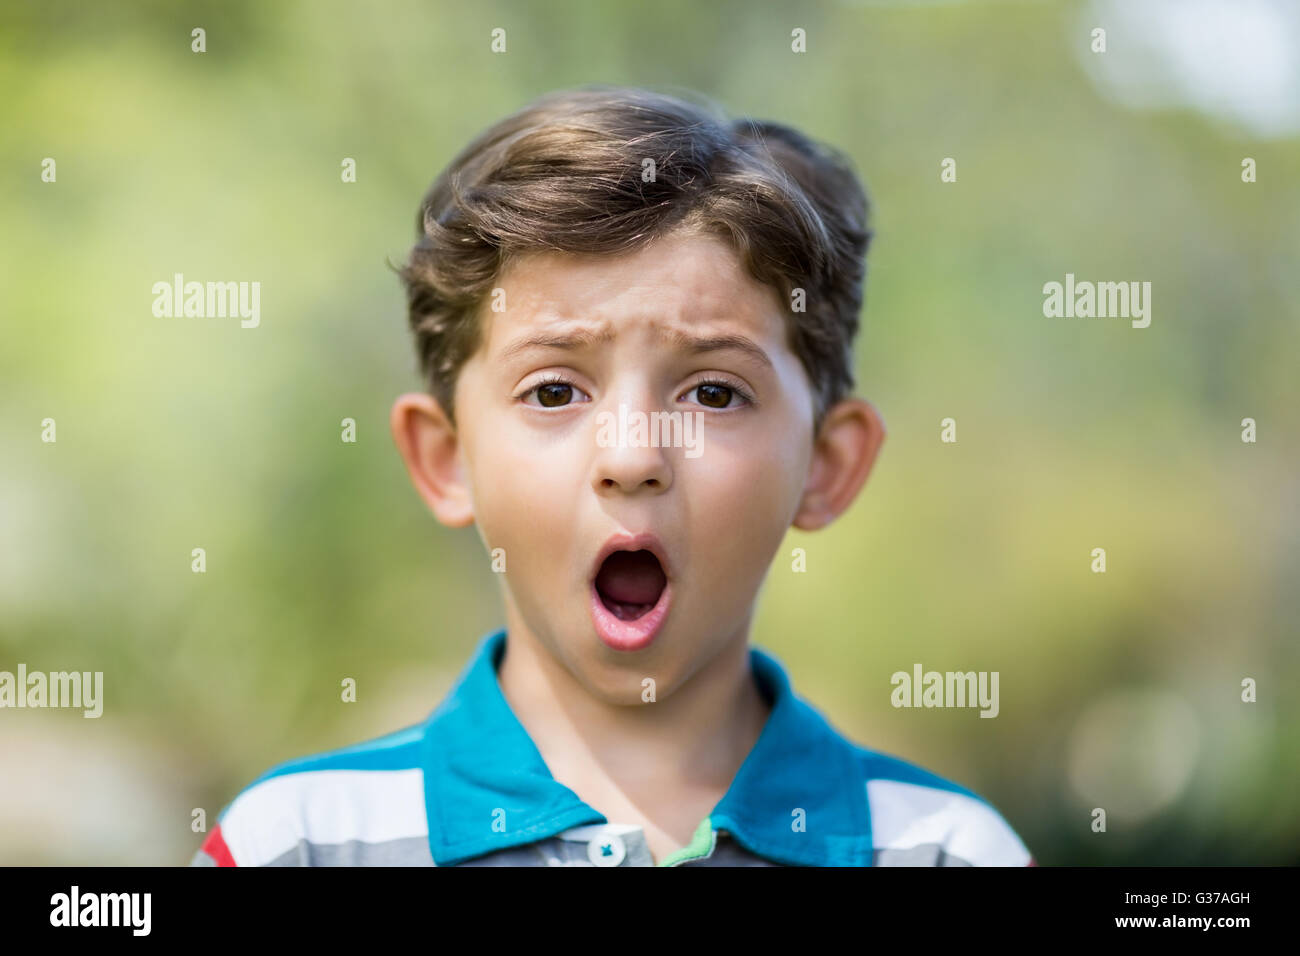 Young boy making a funny faces Stock Photo